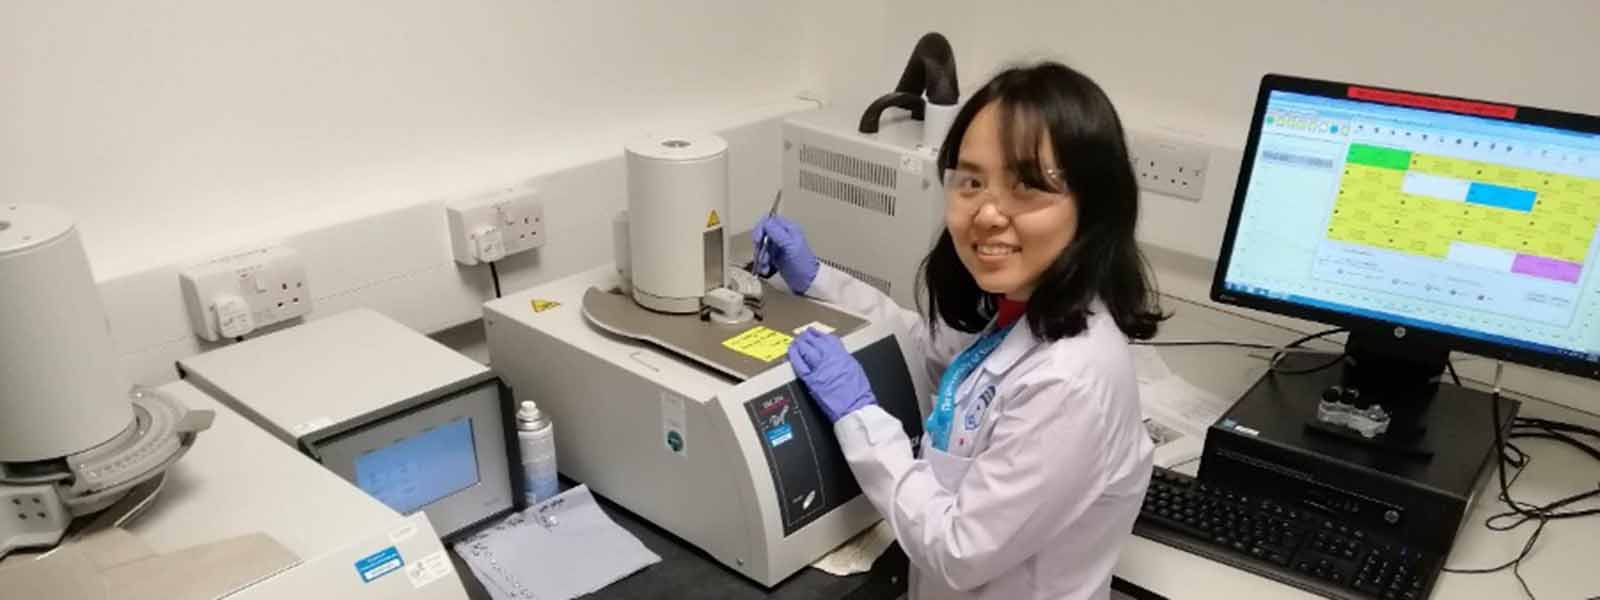 MSc student Tien Thuy Quach in the Continuous Manufacturing and Crystallisation (CMAC) lab